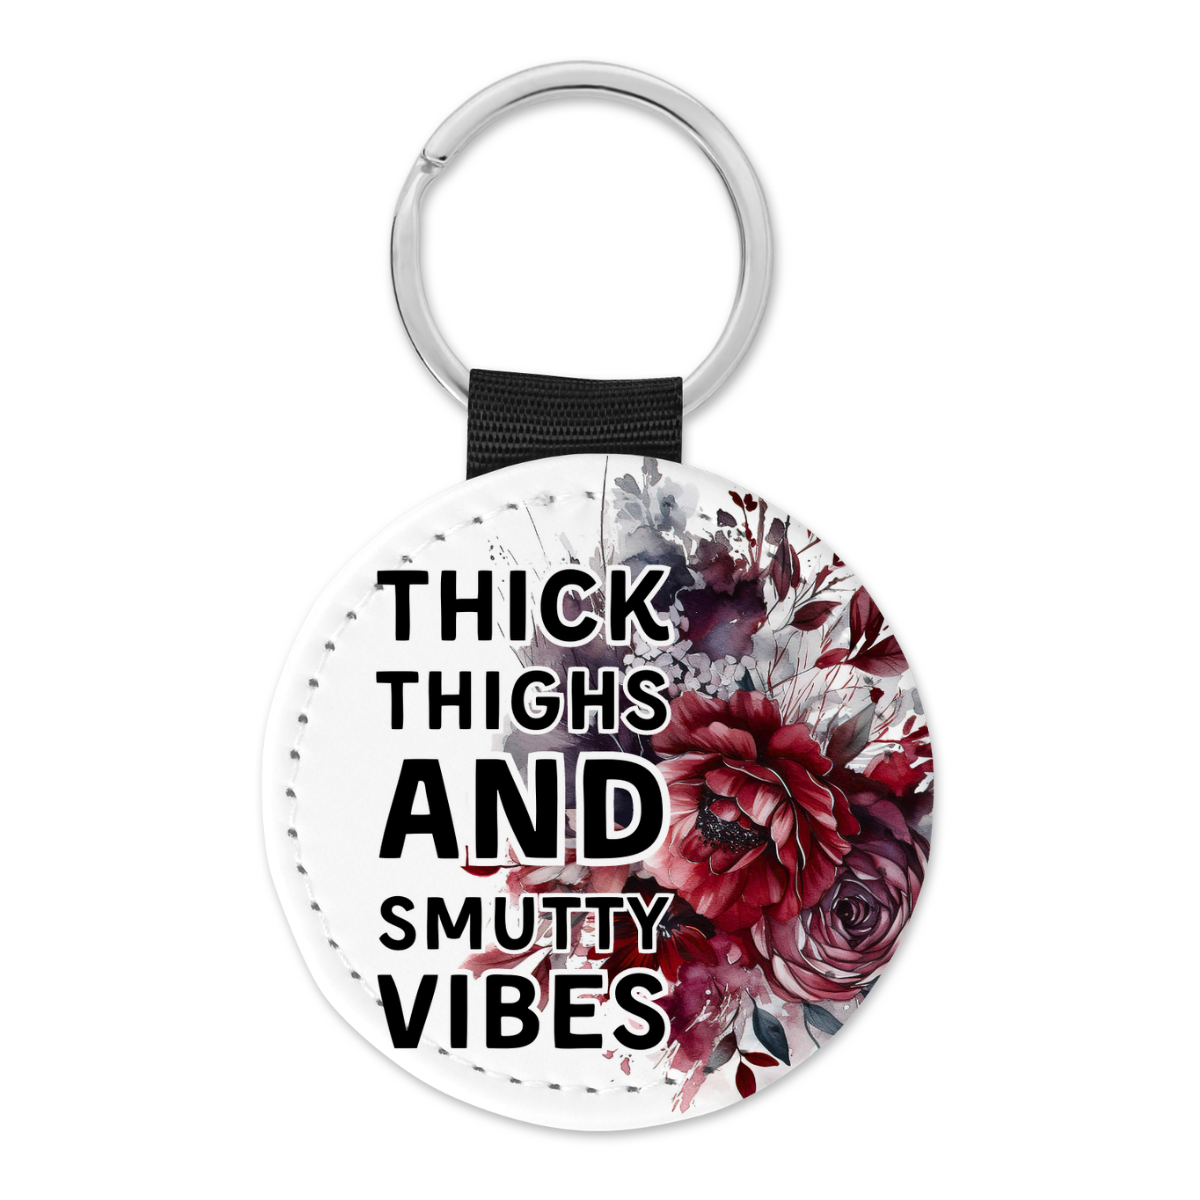 Thick Thighs And Smutty Vibes | Book Lovers Keyring - The Pretty Things.ca